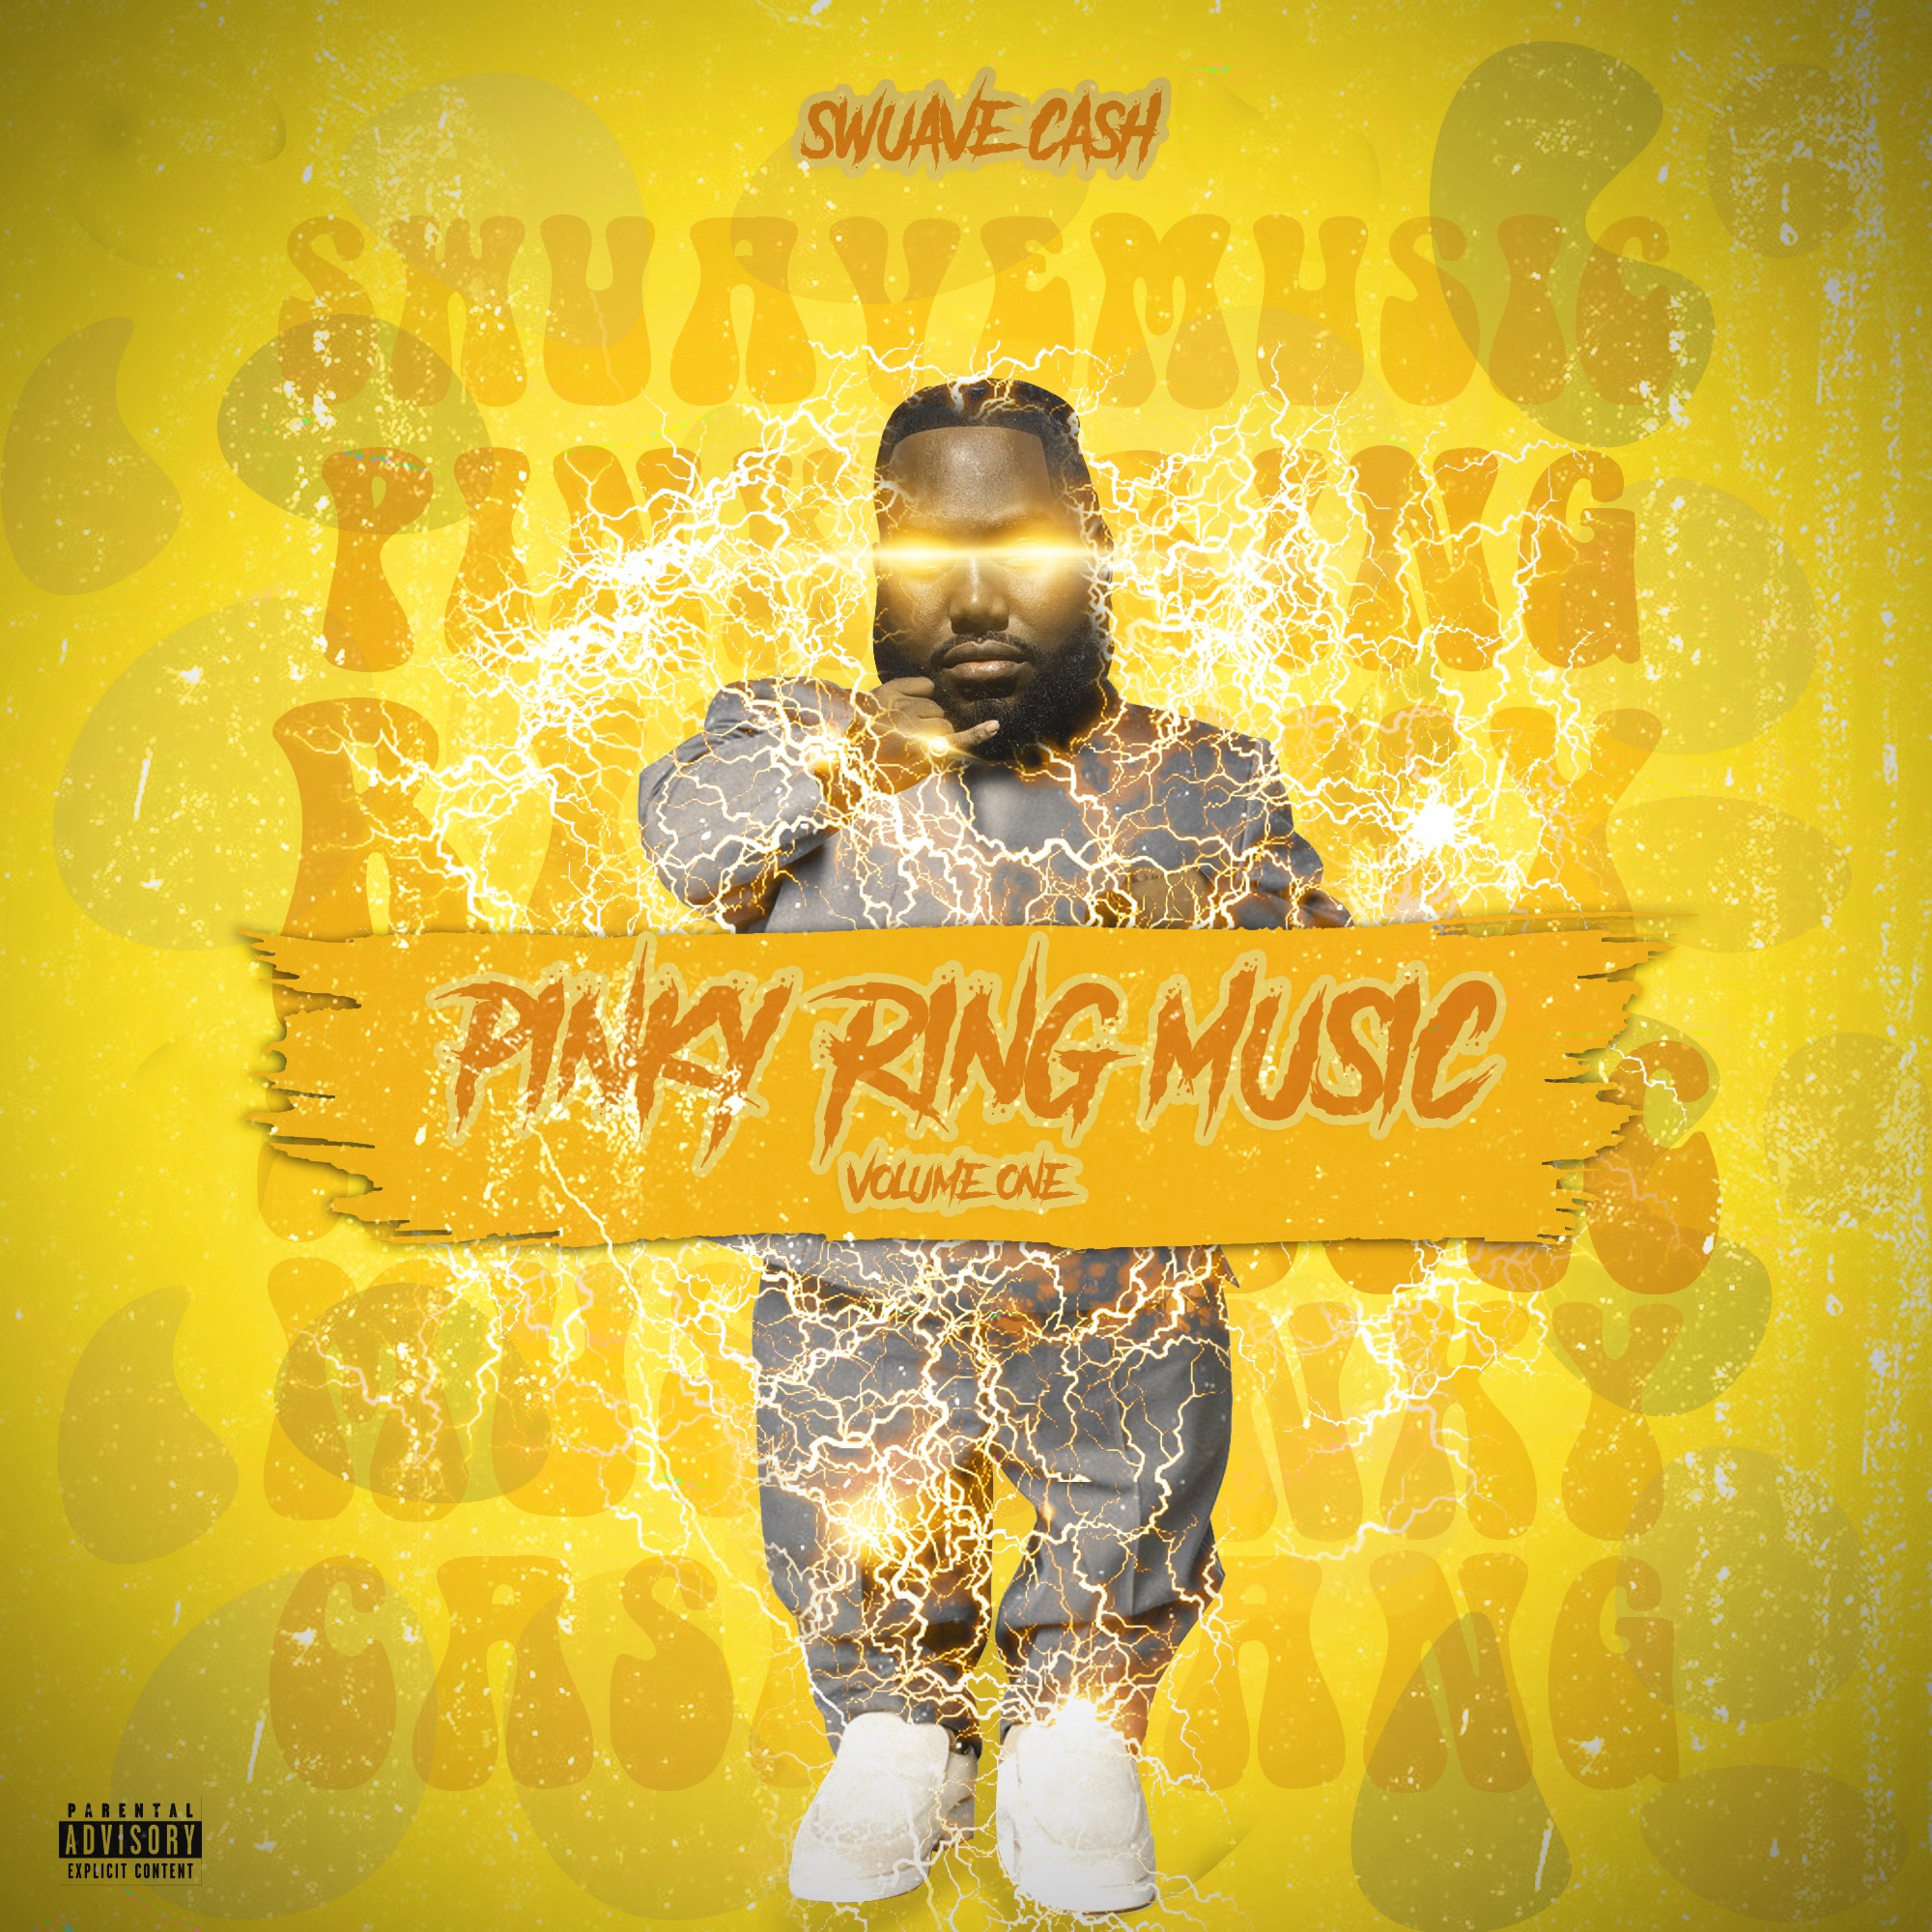 Swuave Cash - Pinky Ring Music (Volume One) Cover Art